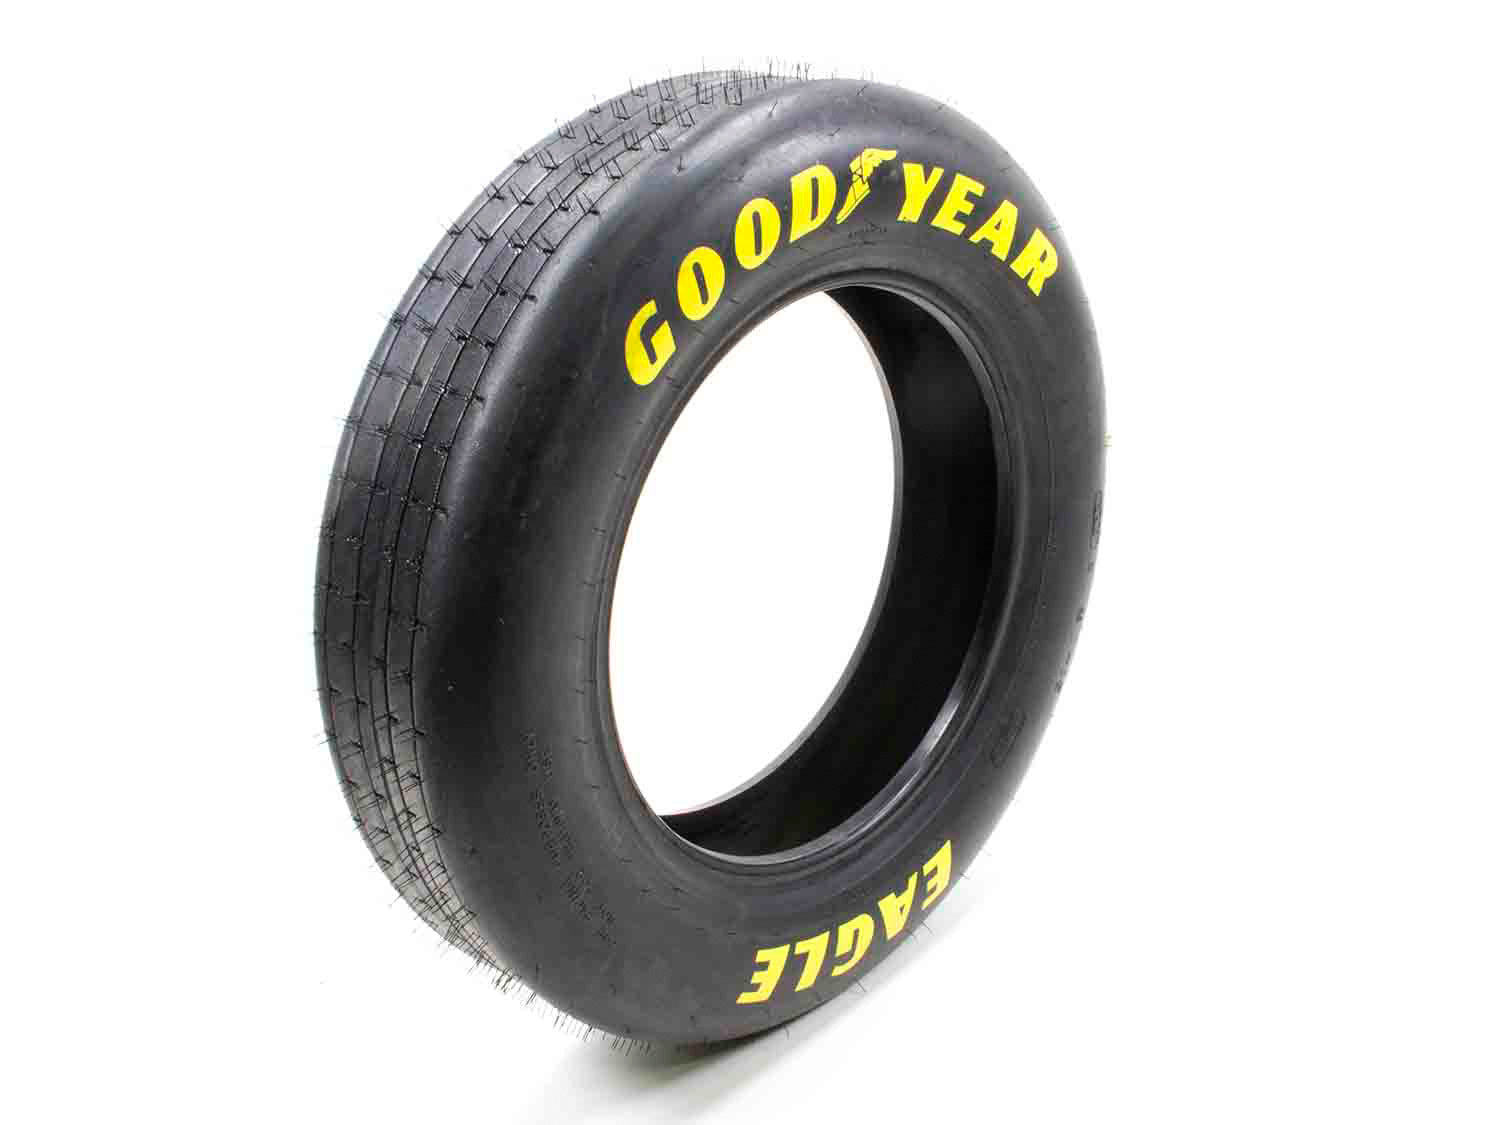 Goodyear 26.0/4.5-15 Front Runner GDYD1964